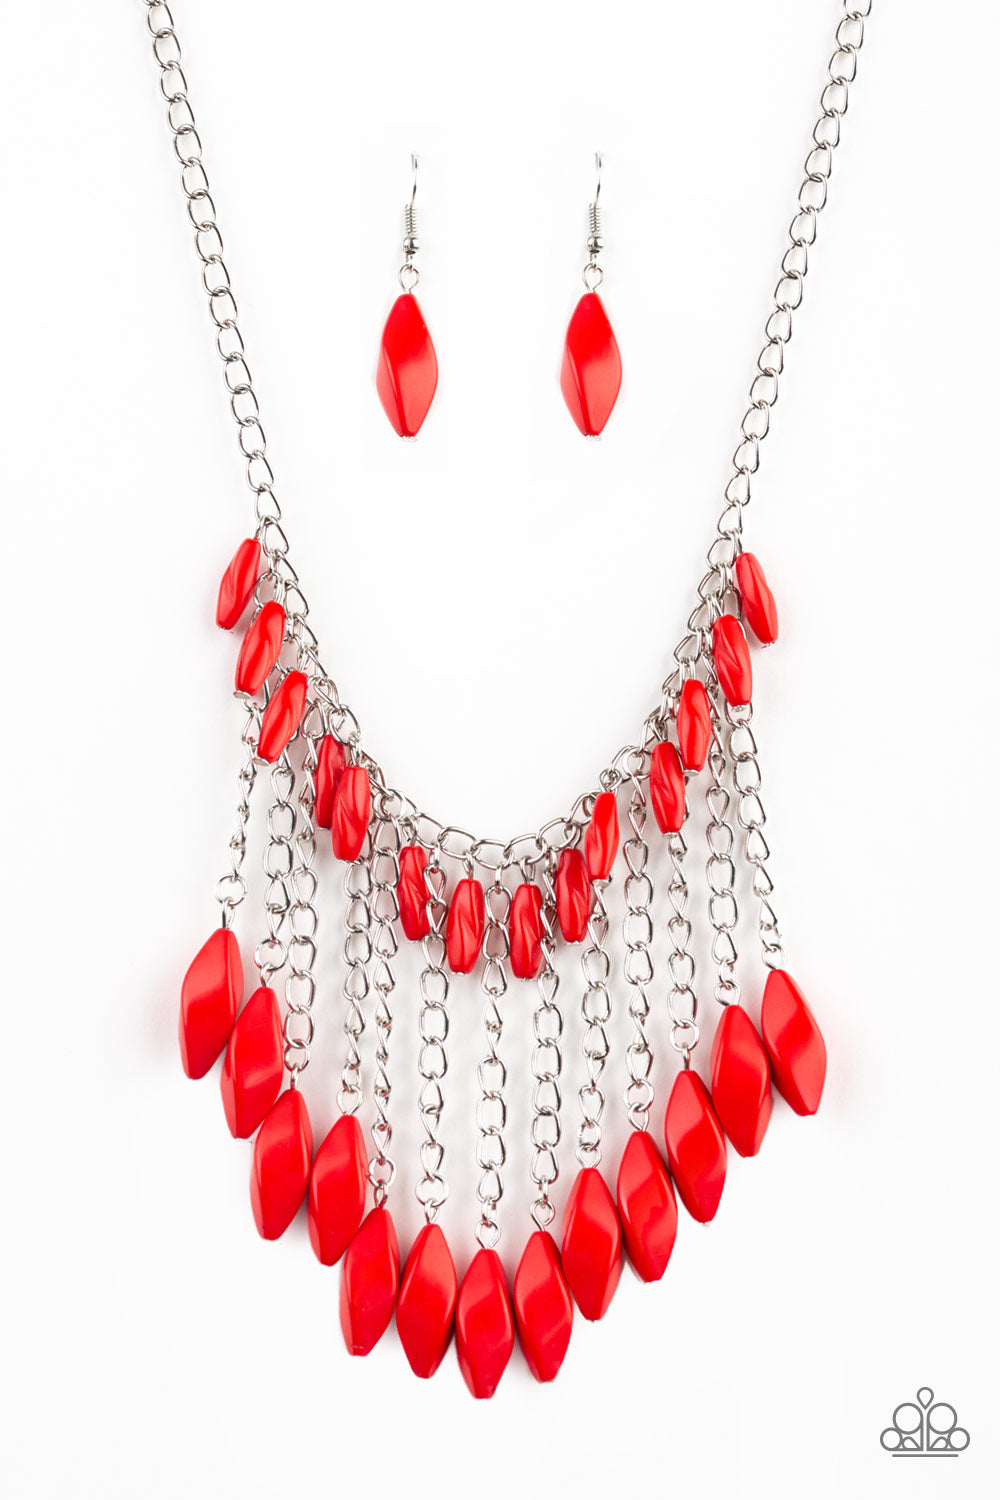 Venturous Vibes - Red necklace